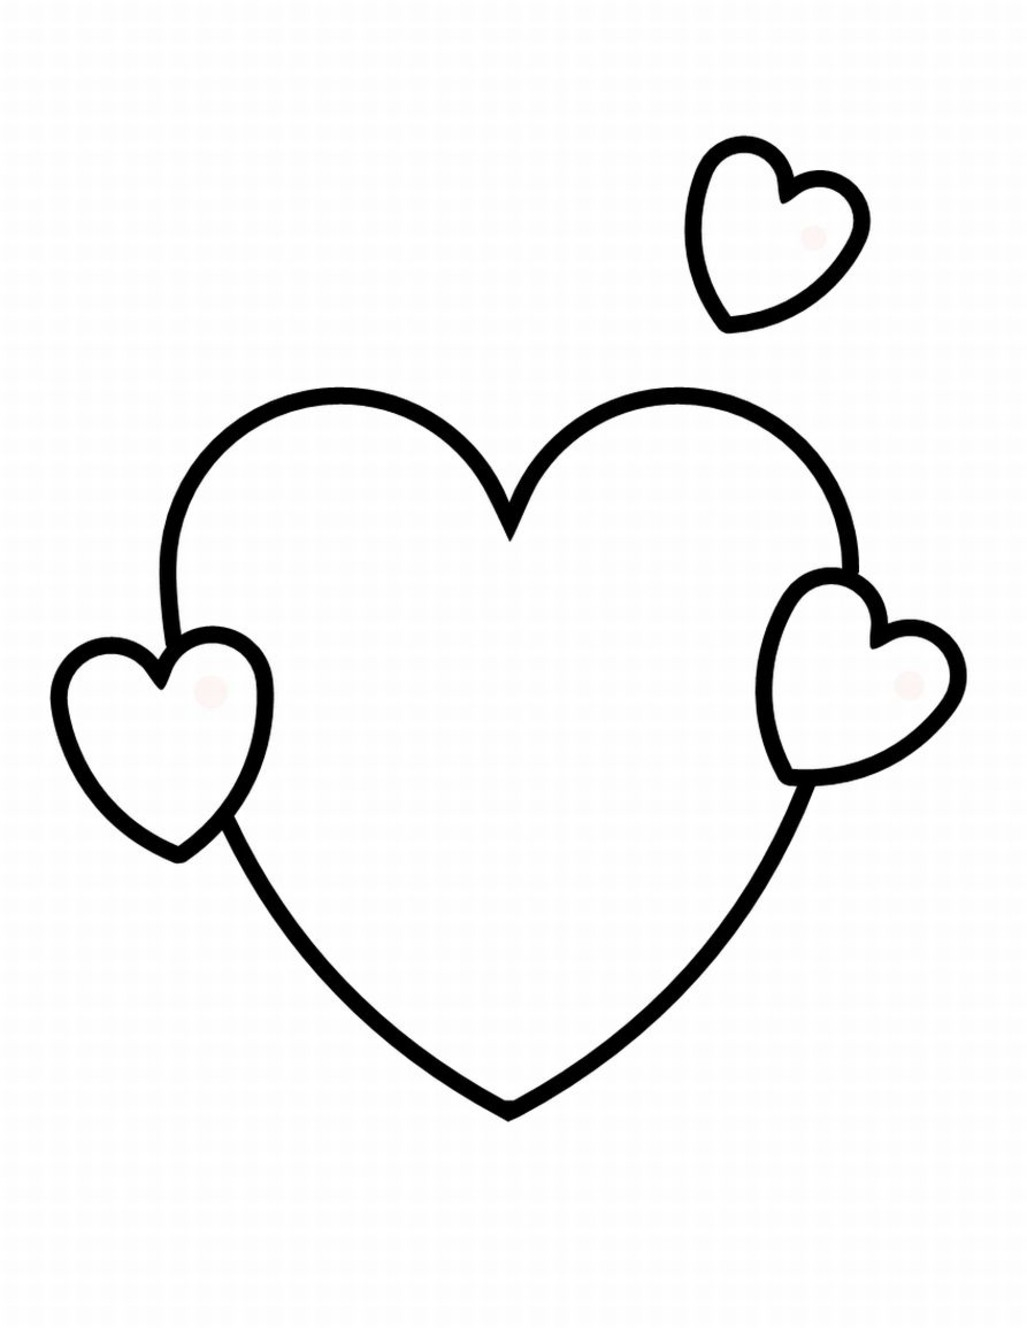 Heart Coloring Pages Pdf Free Coloring Hearts Cliparts Download Free Clip Art Free Clip Art